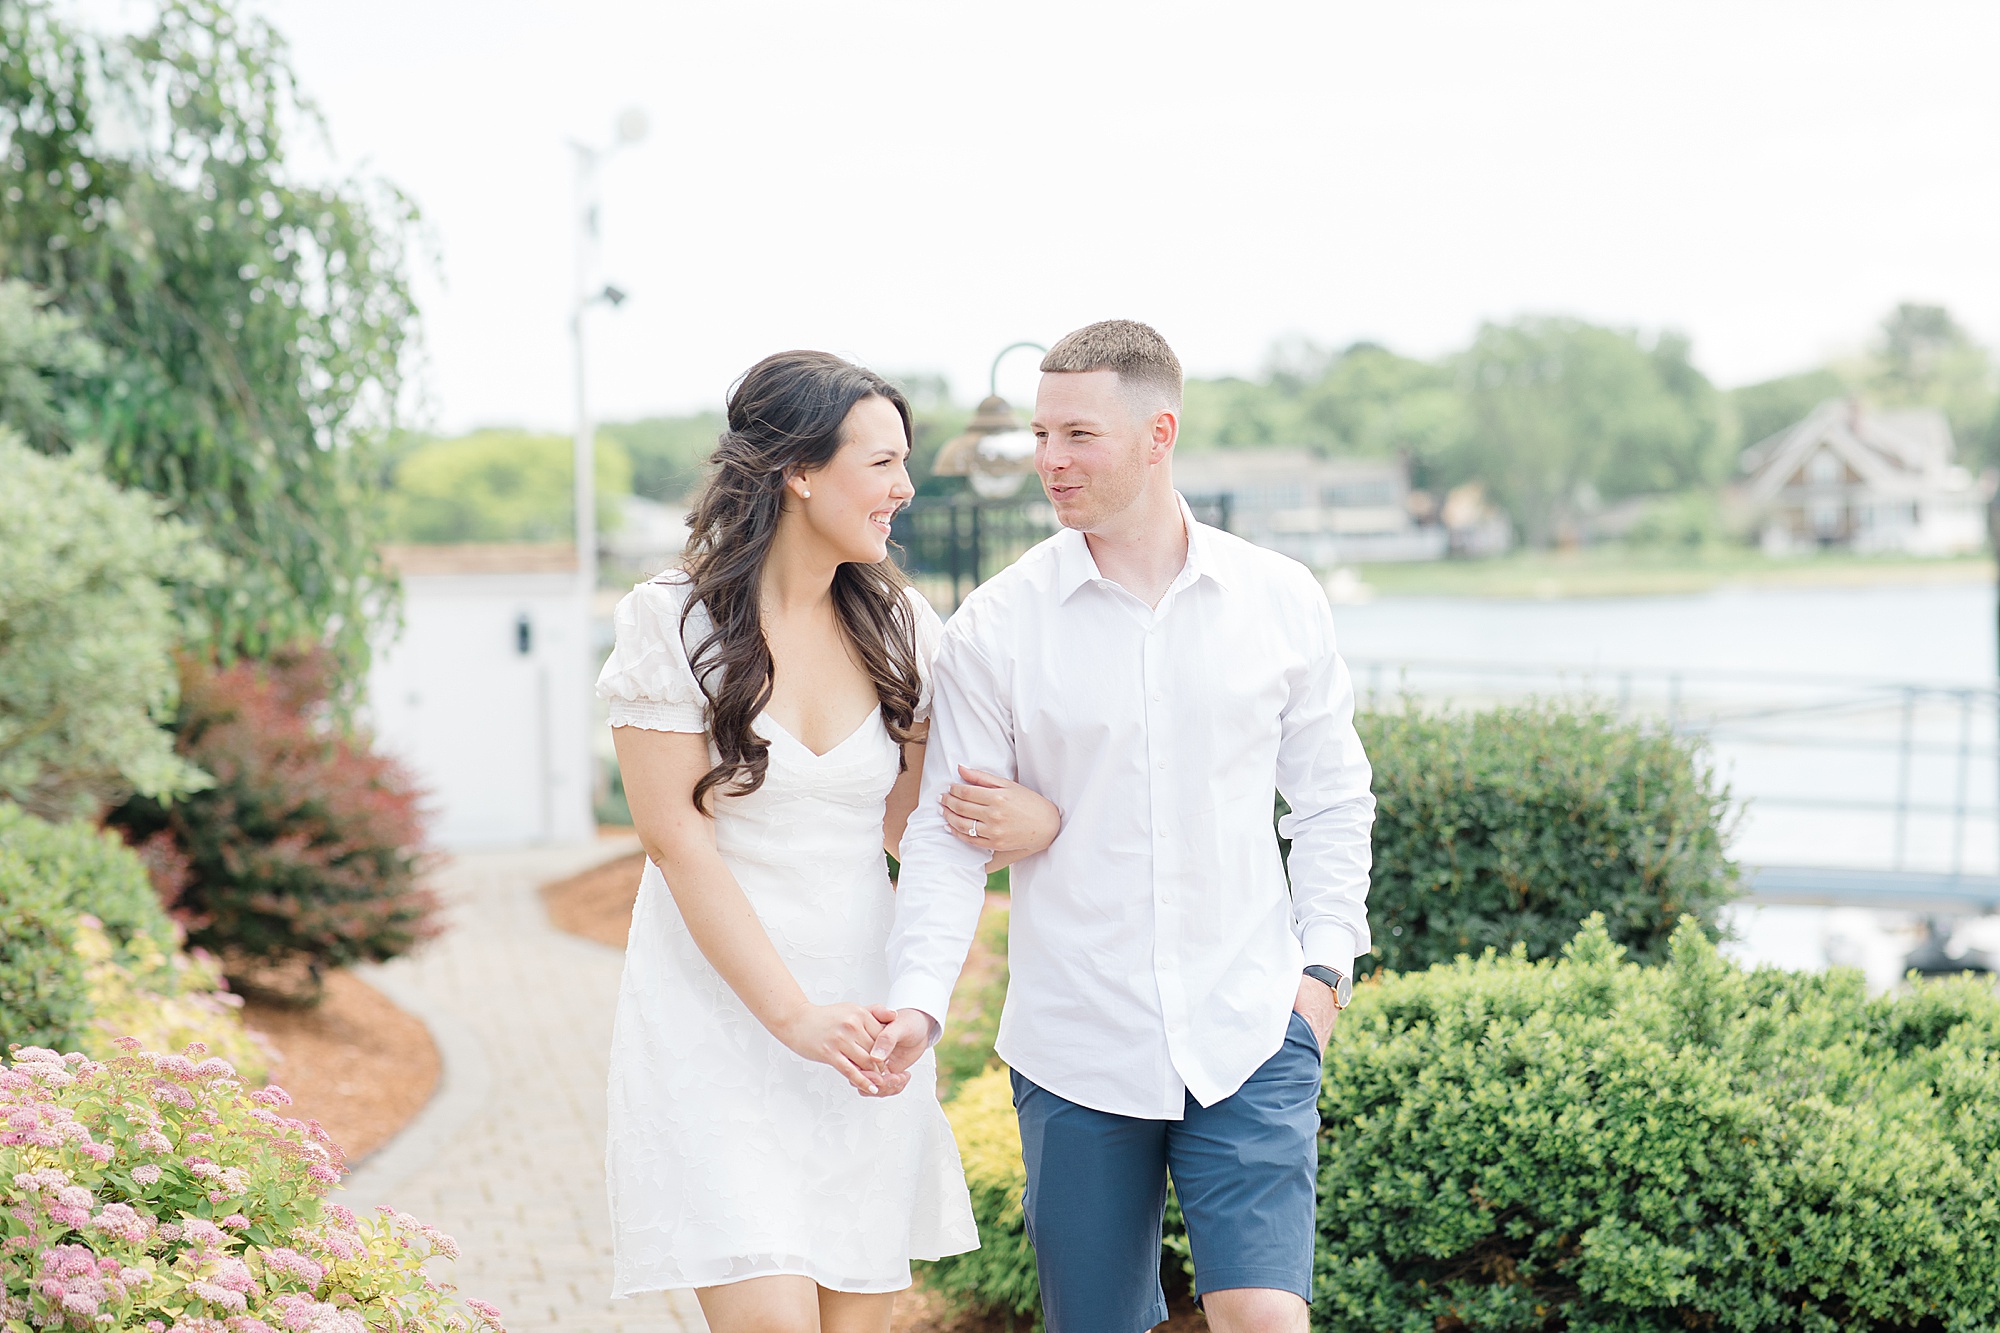 best wedding venues in Massachusetts - an engagement at the Danversport Yacht Club